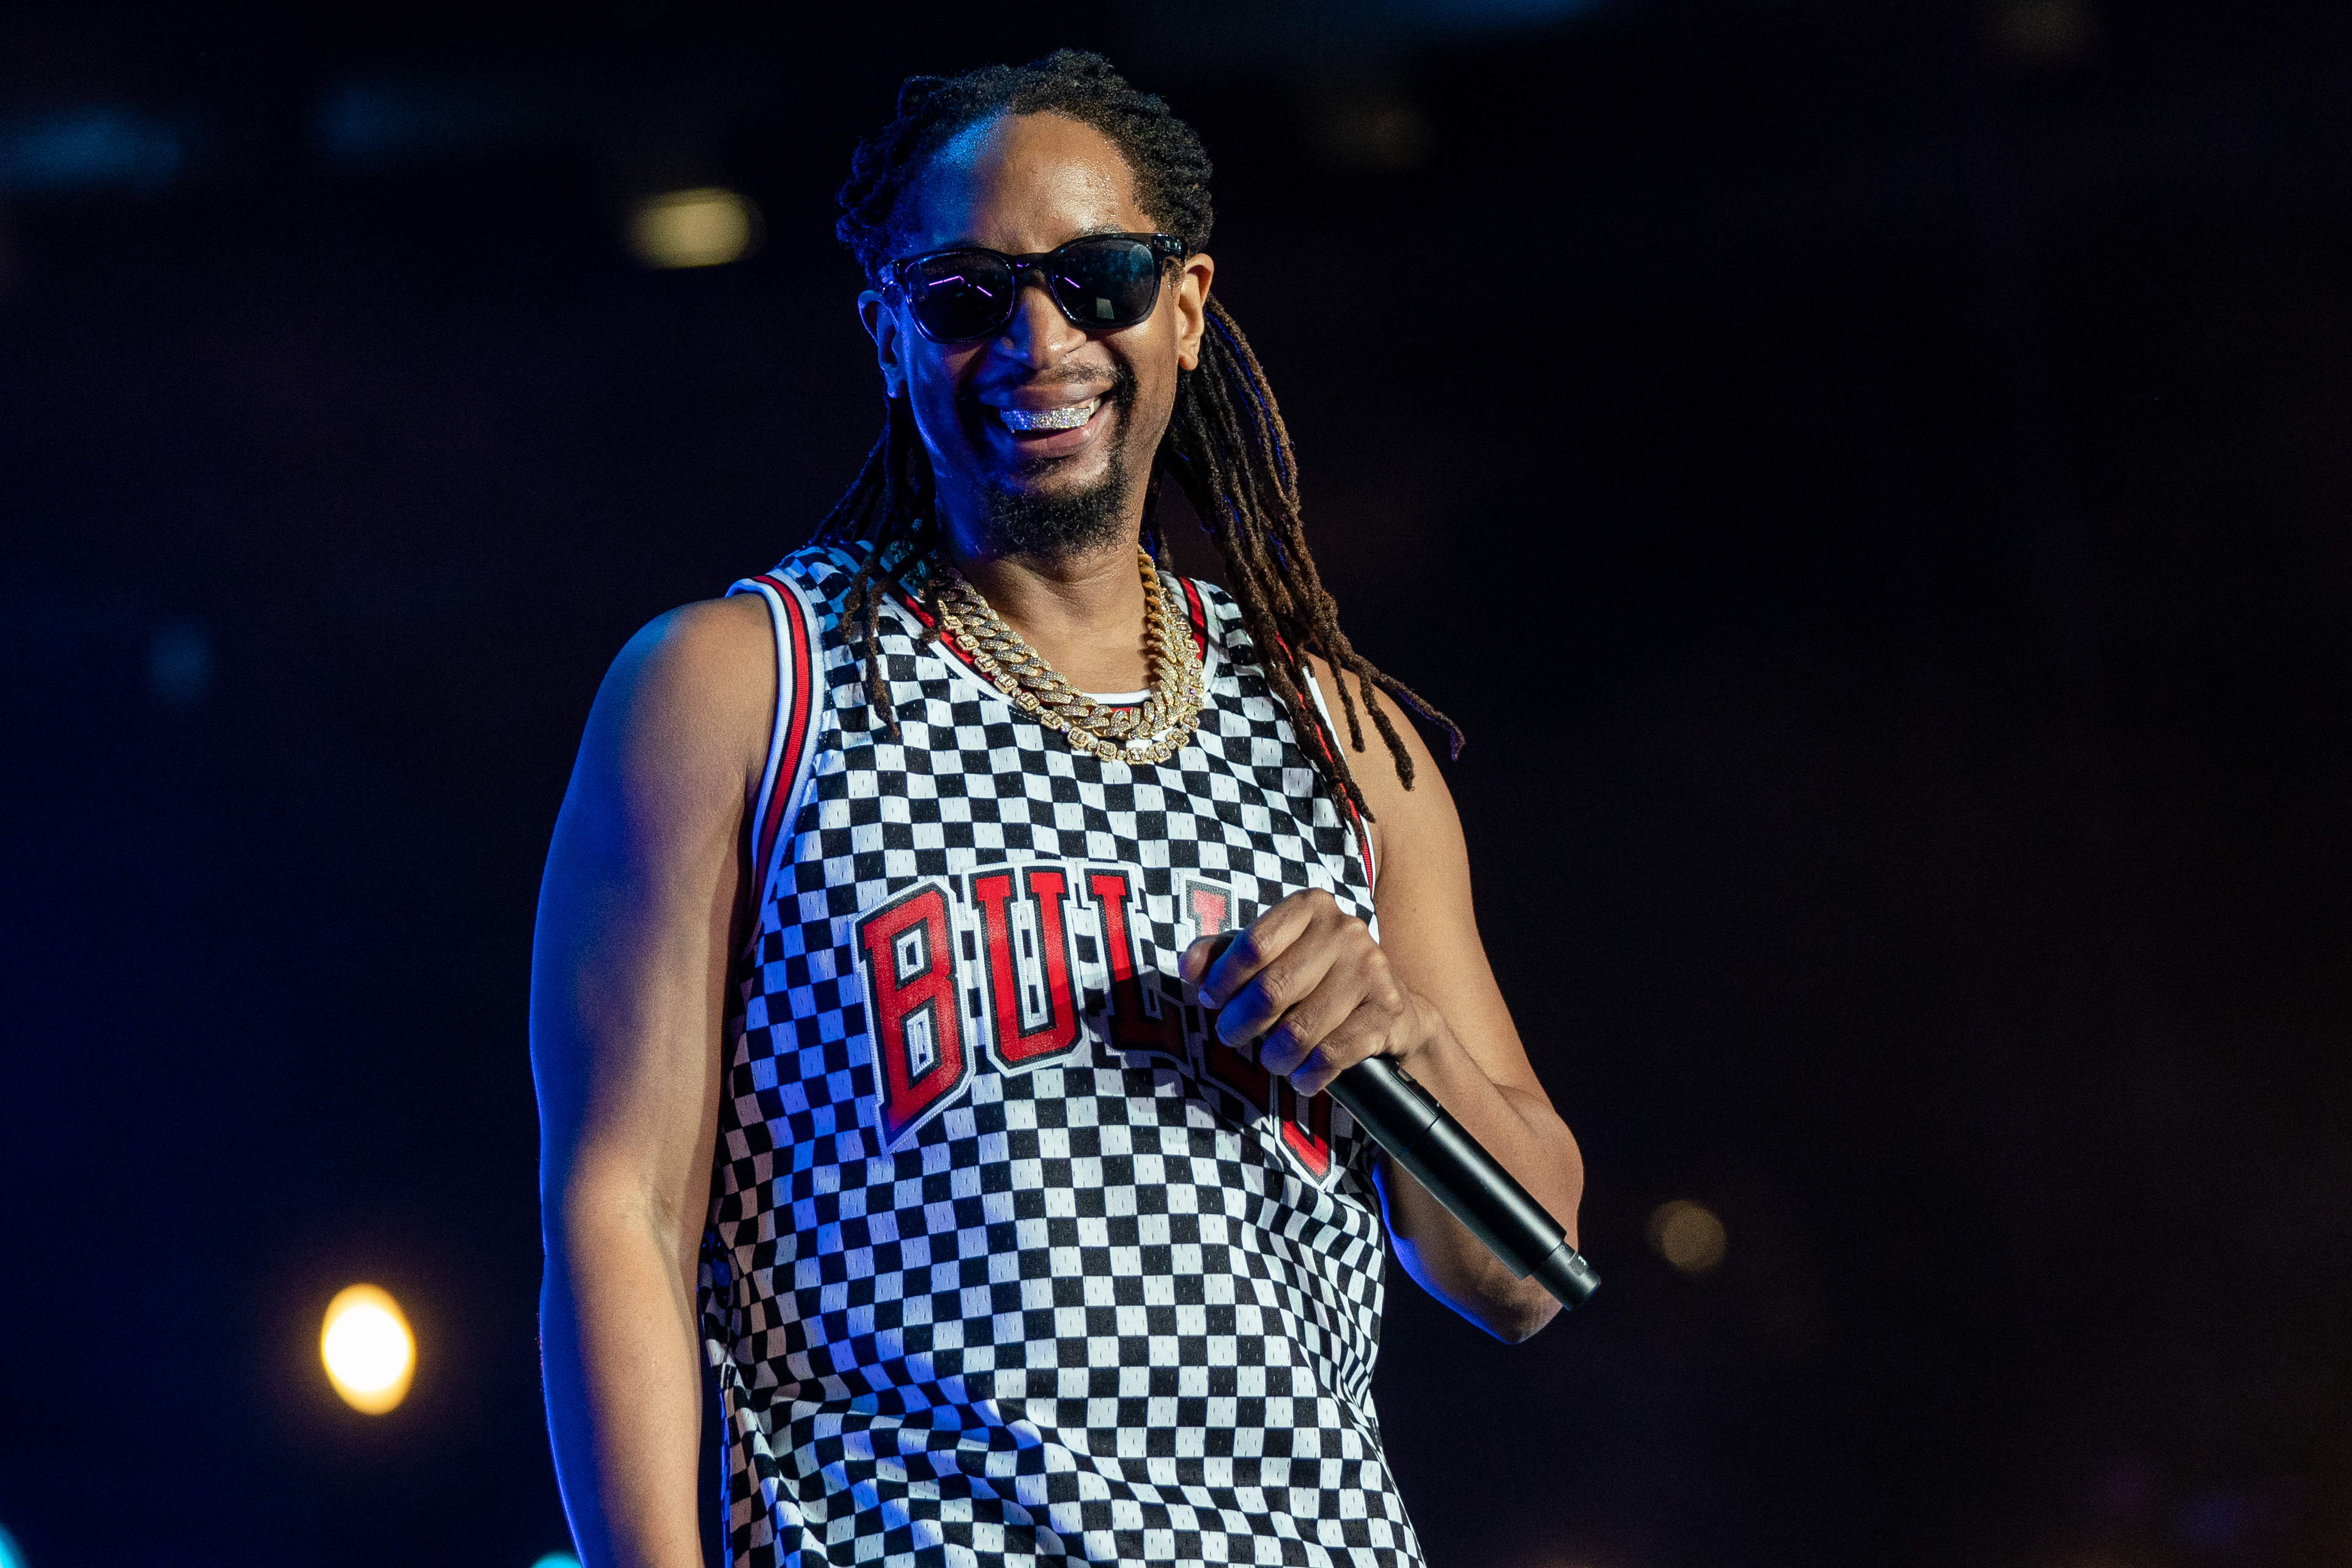 Lil John will join Usher on stage on Sunday afternoon to perform their famous hit